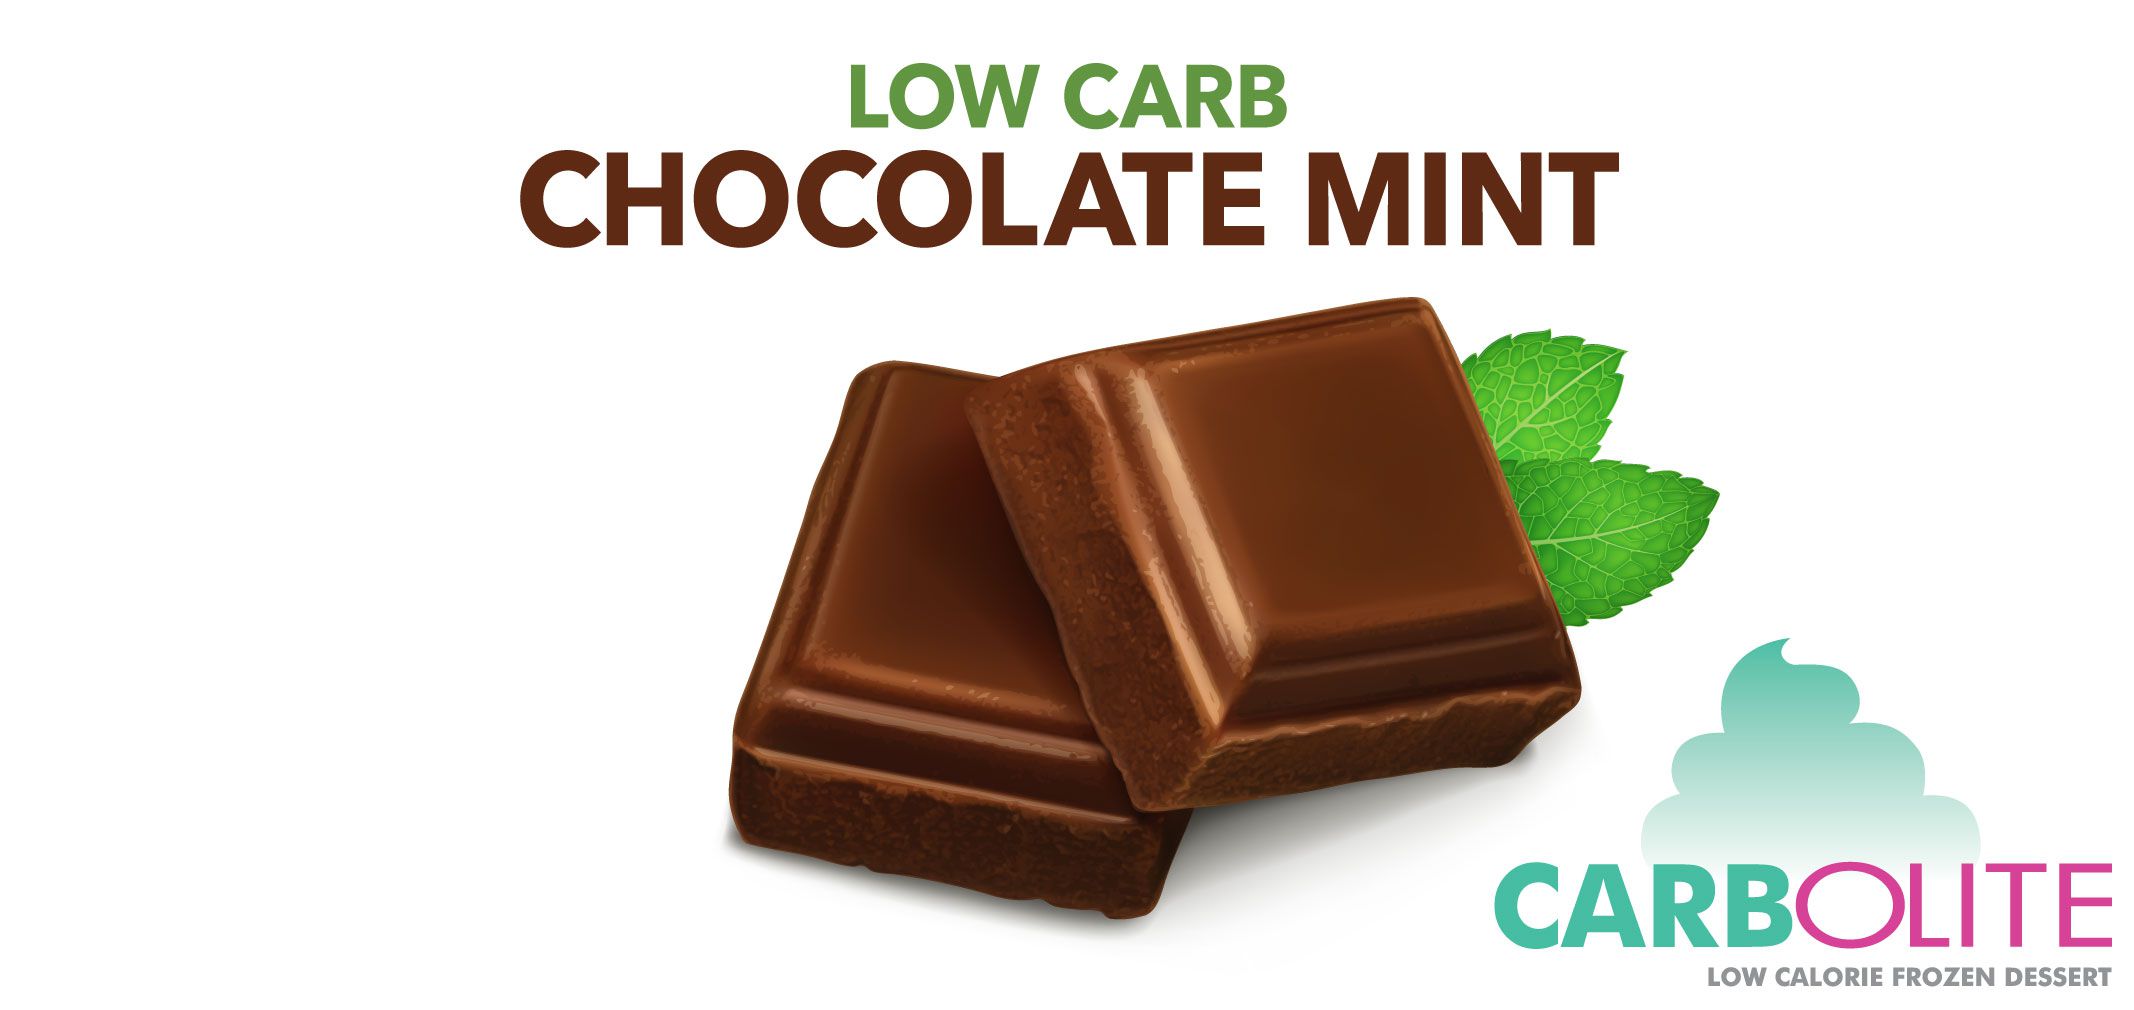 carbolite low carb chocolate mint label image